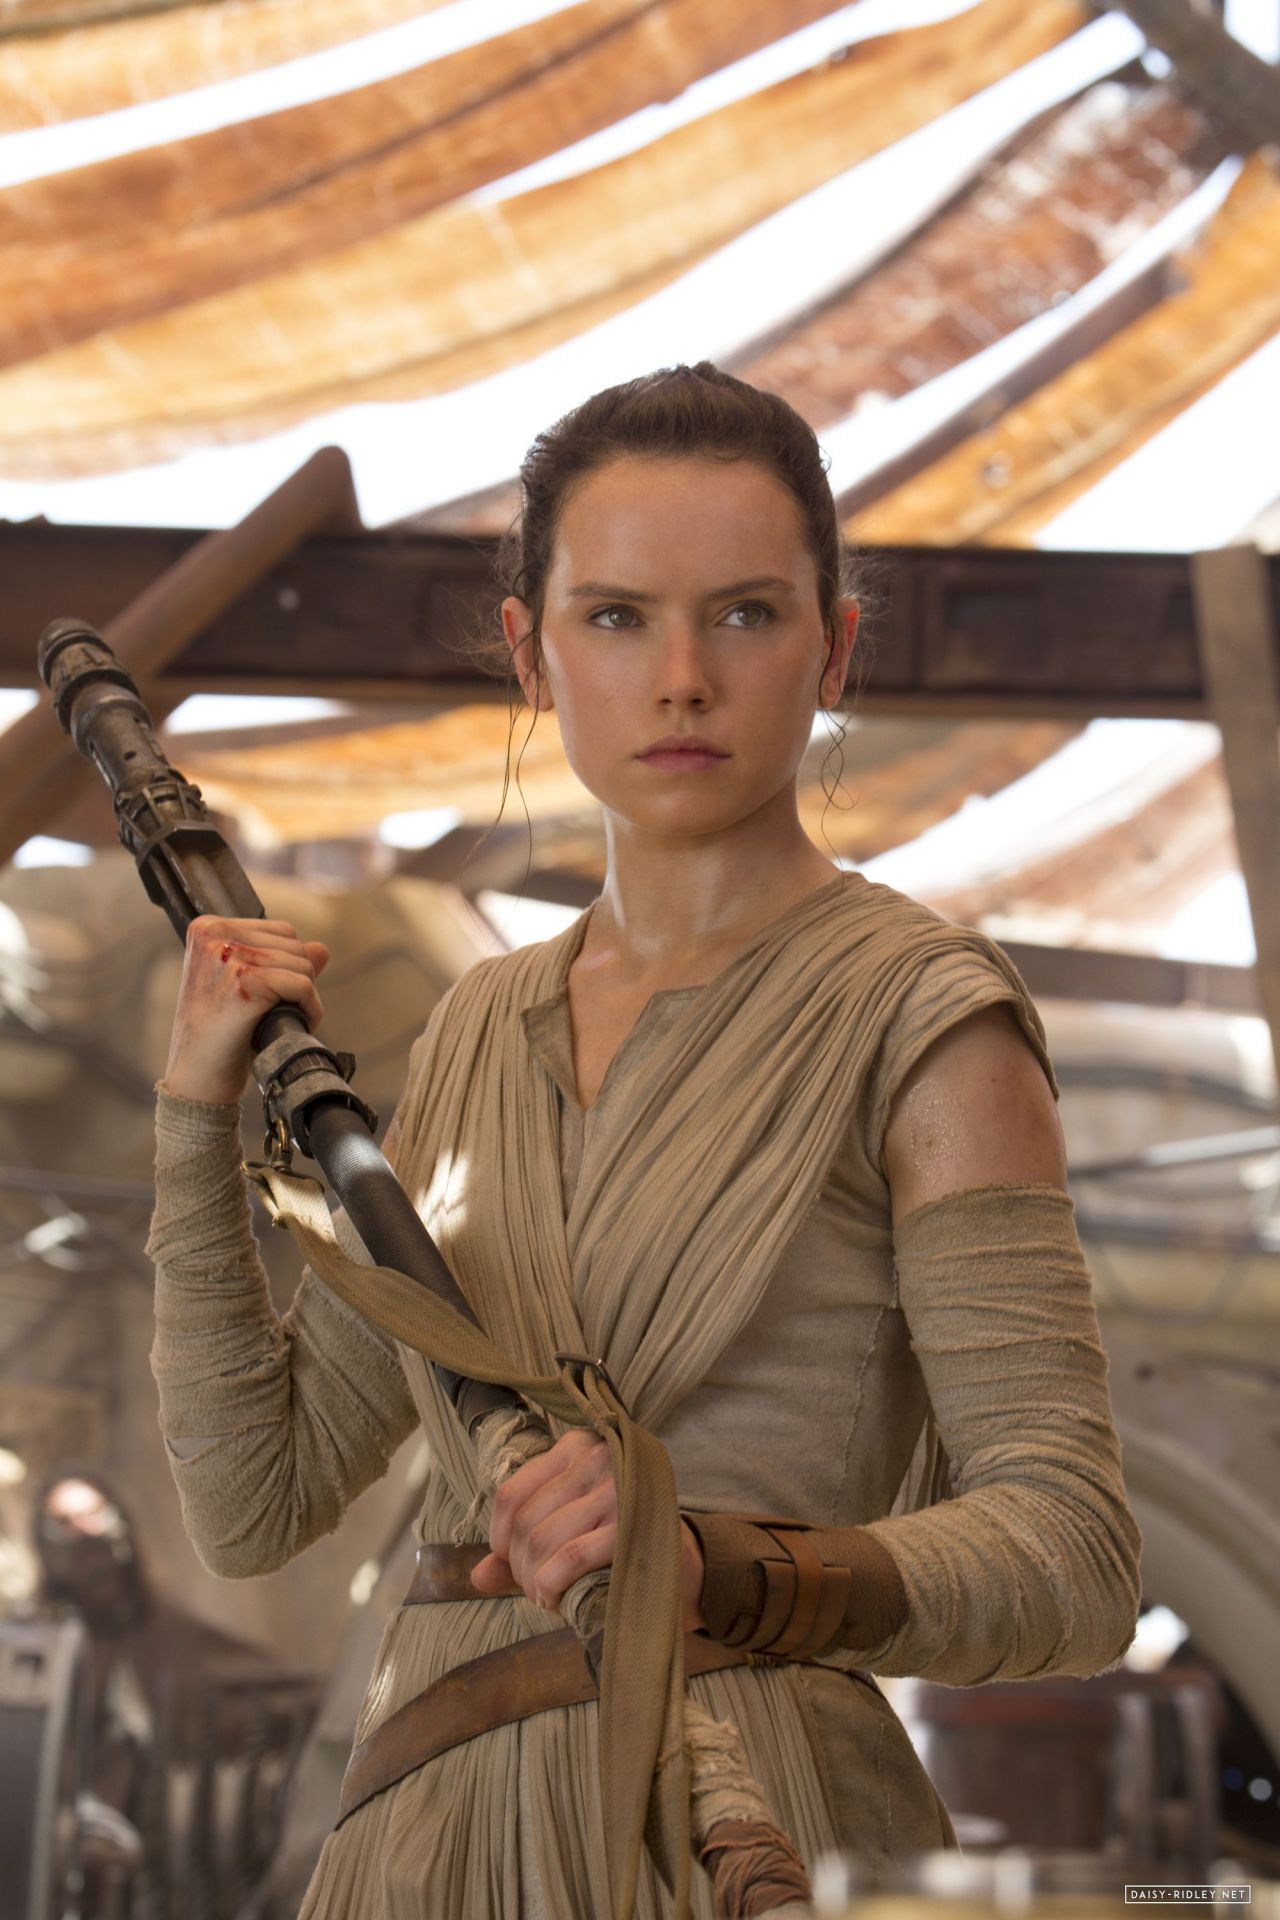 daisy-ridley-star-wars-the-force-awakens-poster-stills-and-promos-2015_3 -  Cinema Planet